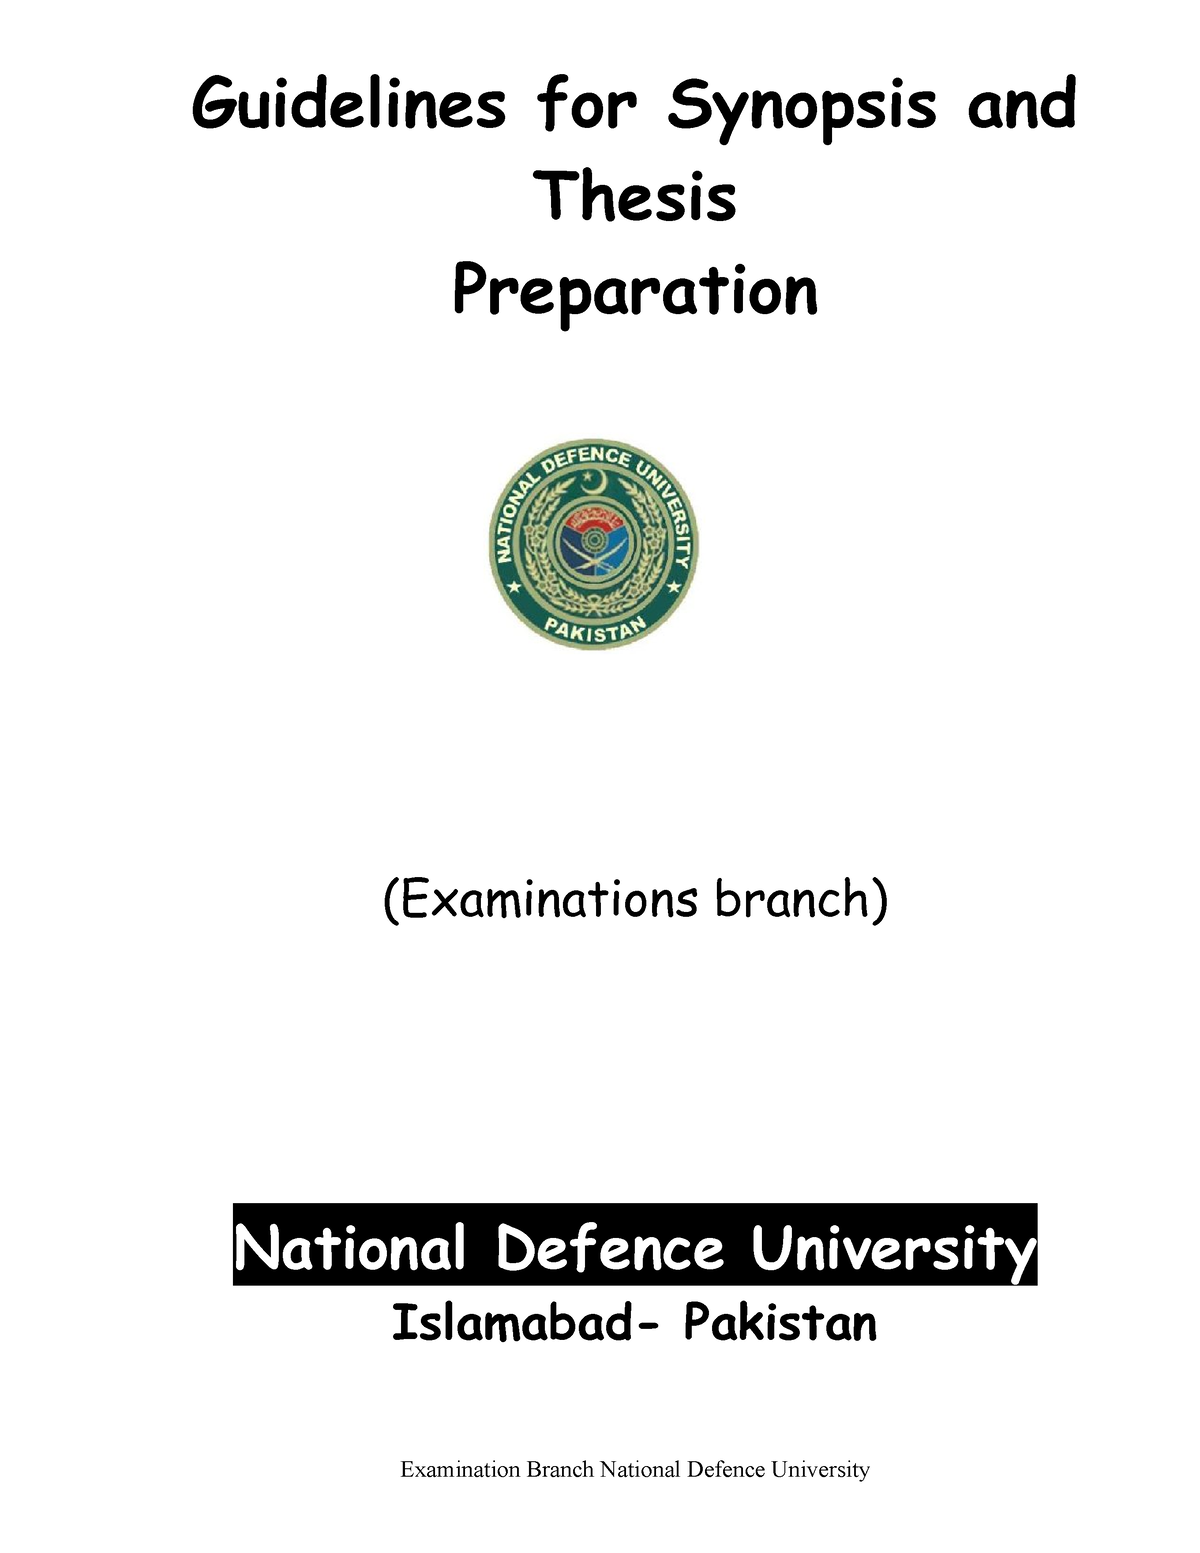 Guidlines For Thesis 2 Guidelines For Synopsis And Thesis Preparation